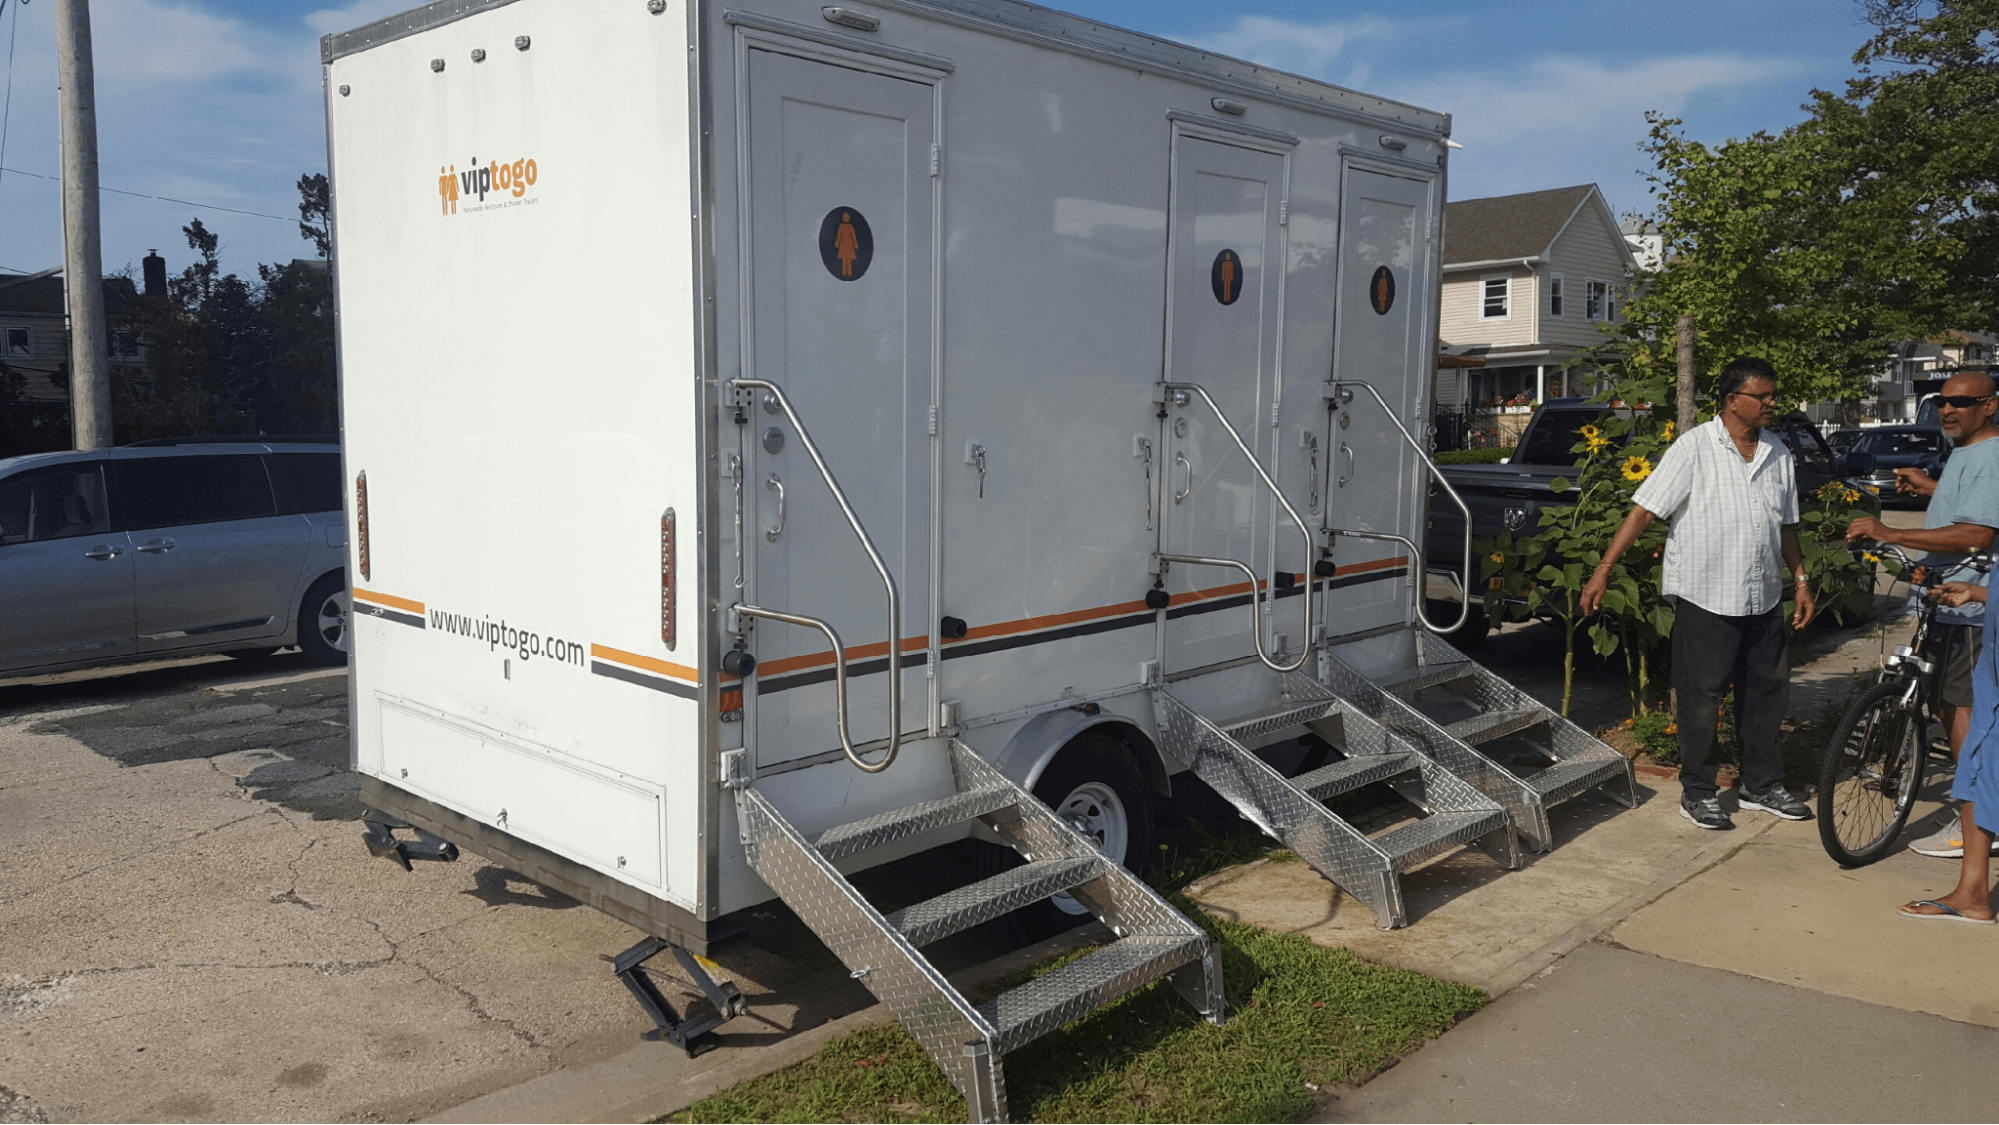 VIP To Go’s three station restroom trailer size at an outdoor event